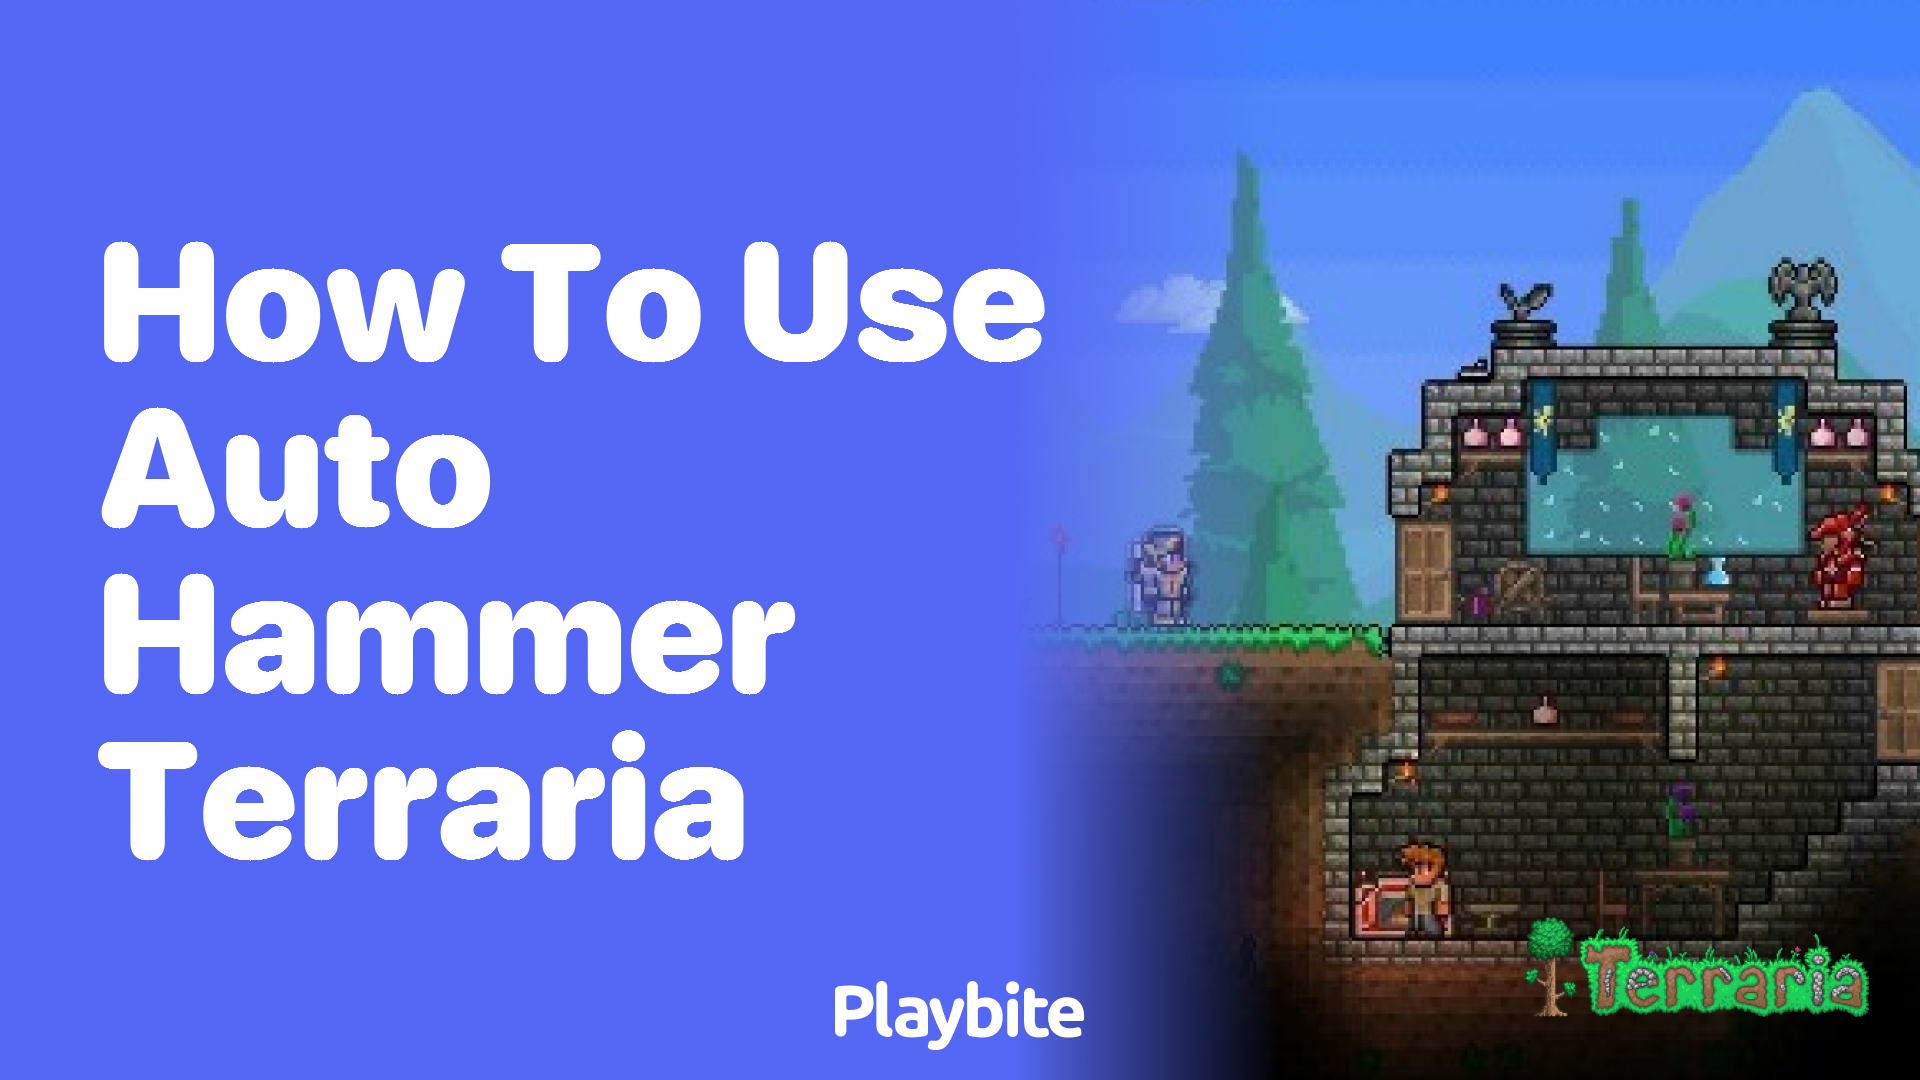 How to Use the Auto Hammer in Terraria